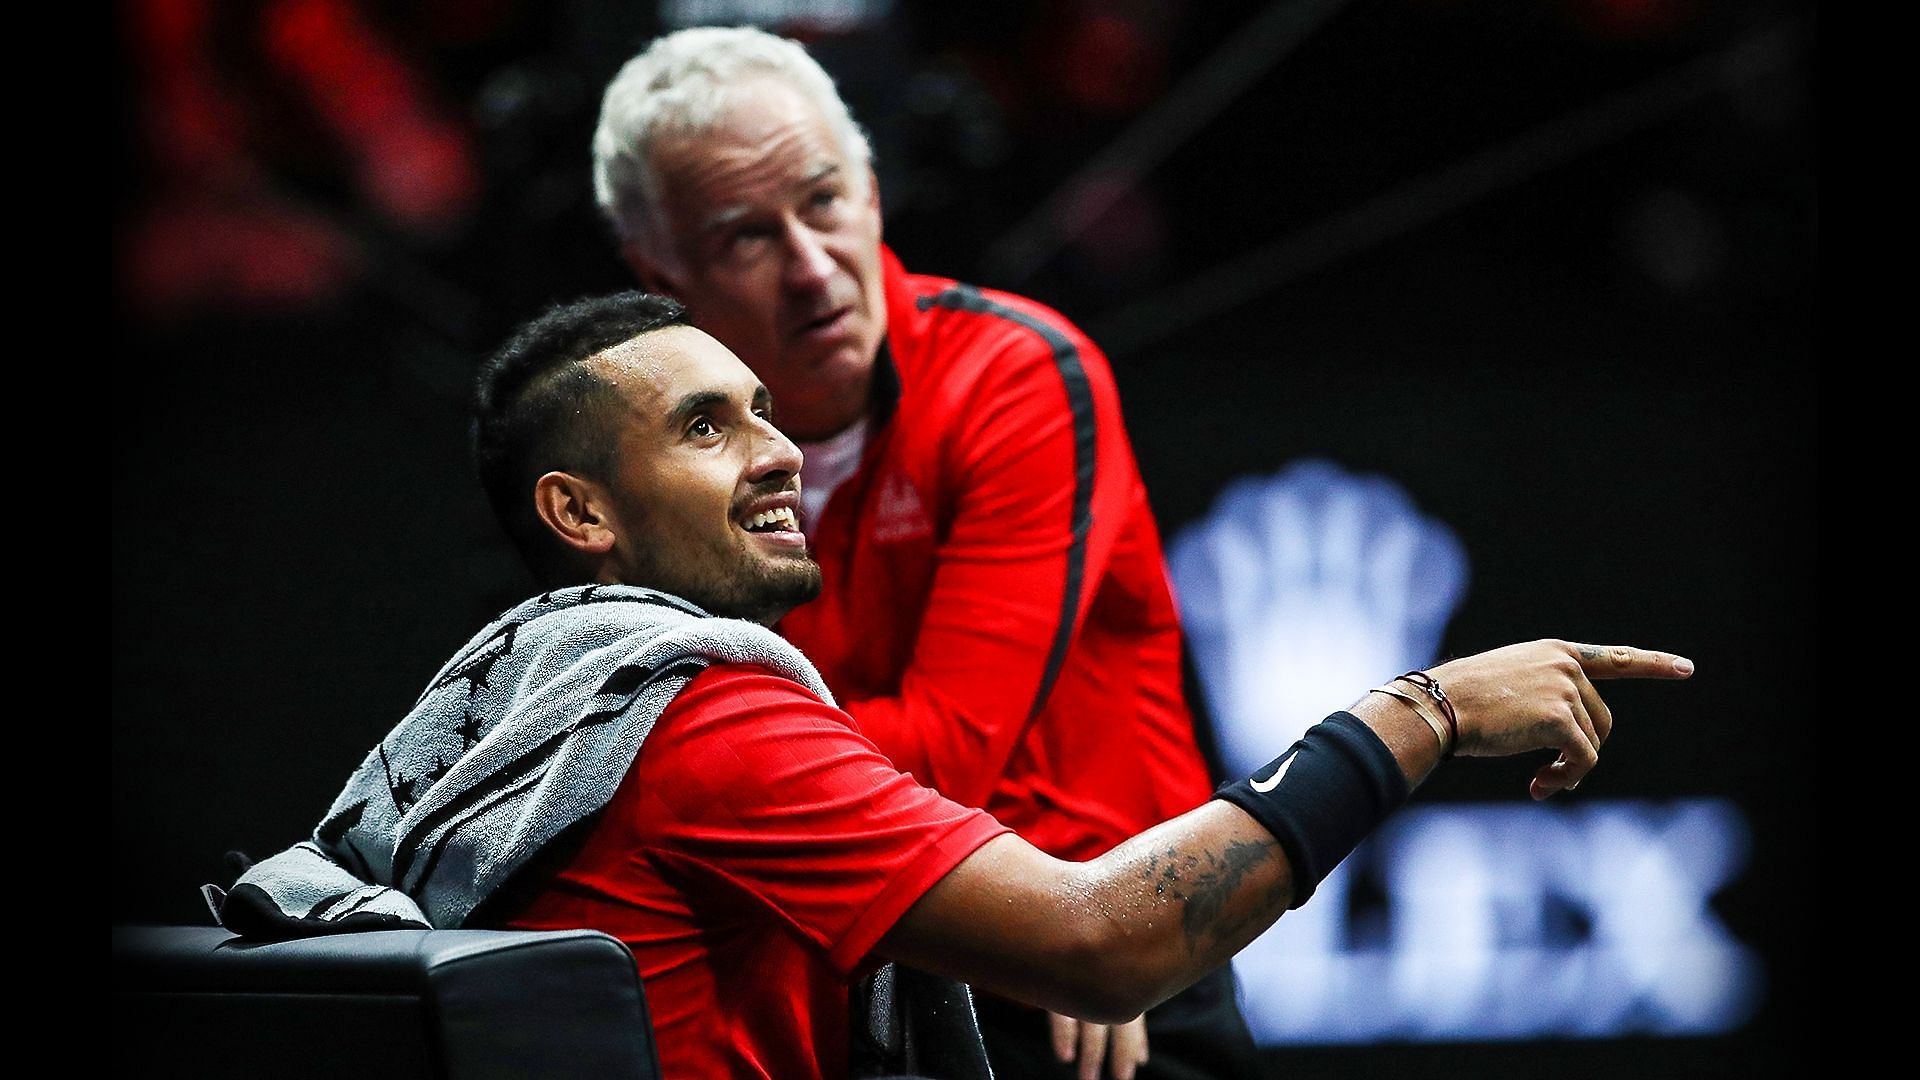 Nick Kyrgios blamed his 2019 Laver Cup defeat to Roger Federer on an attractive woman 